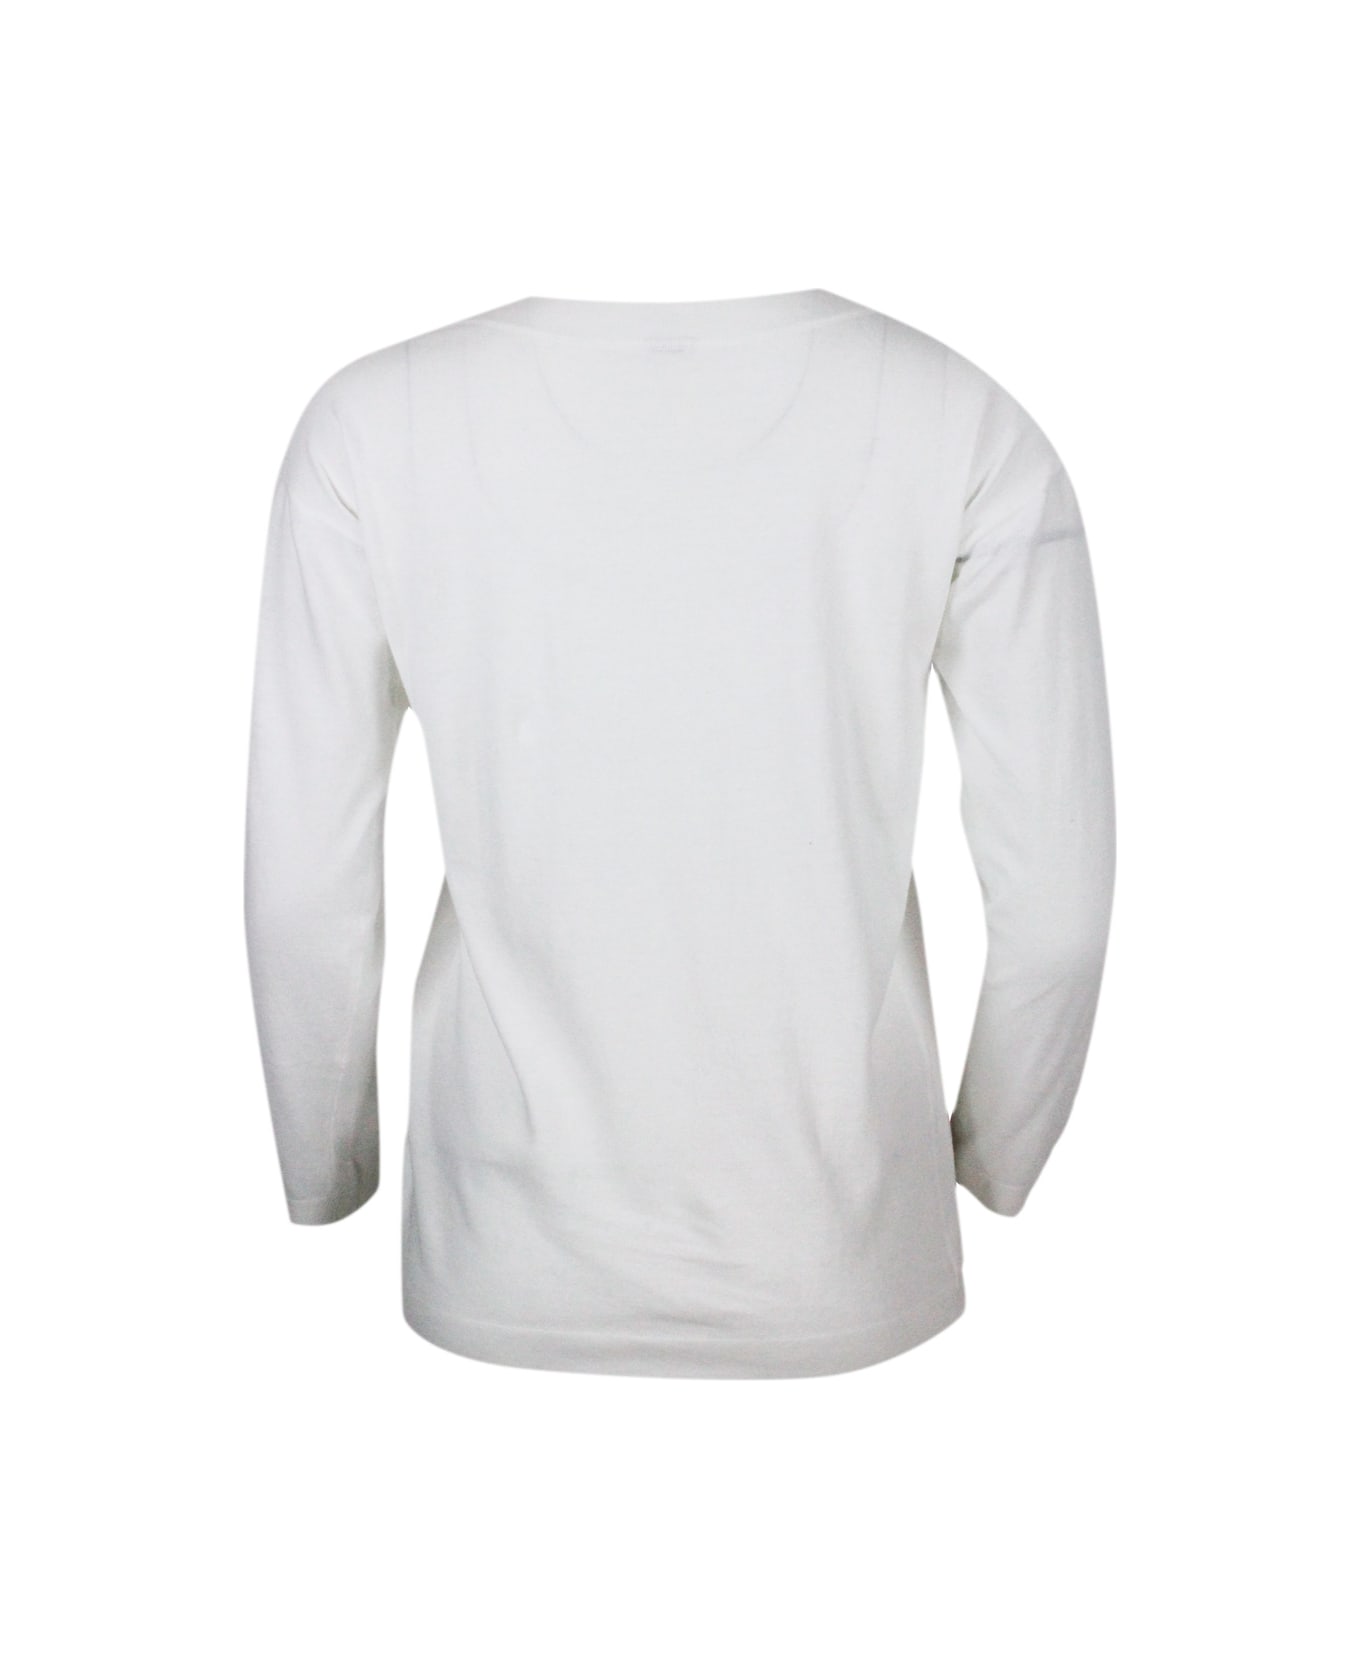 Malo Crew-neck, Long-sleeved Shirt In Cotton Thread With Buttons On The Shoulder - White